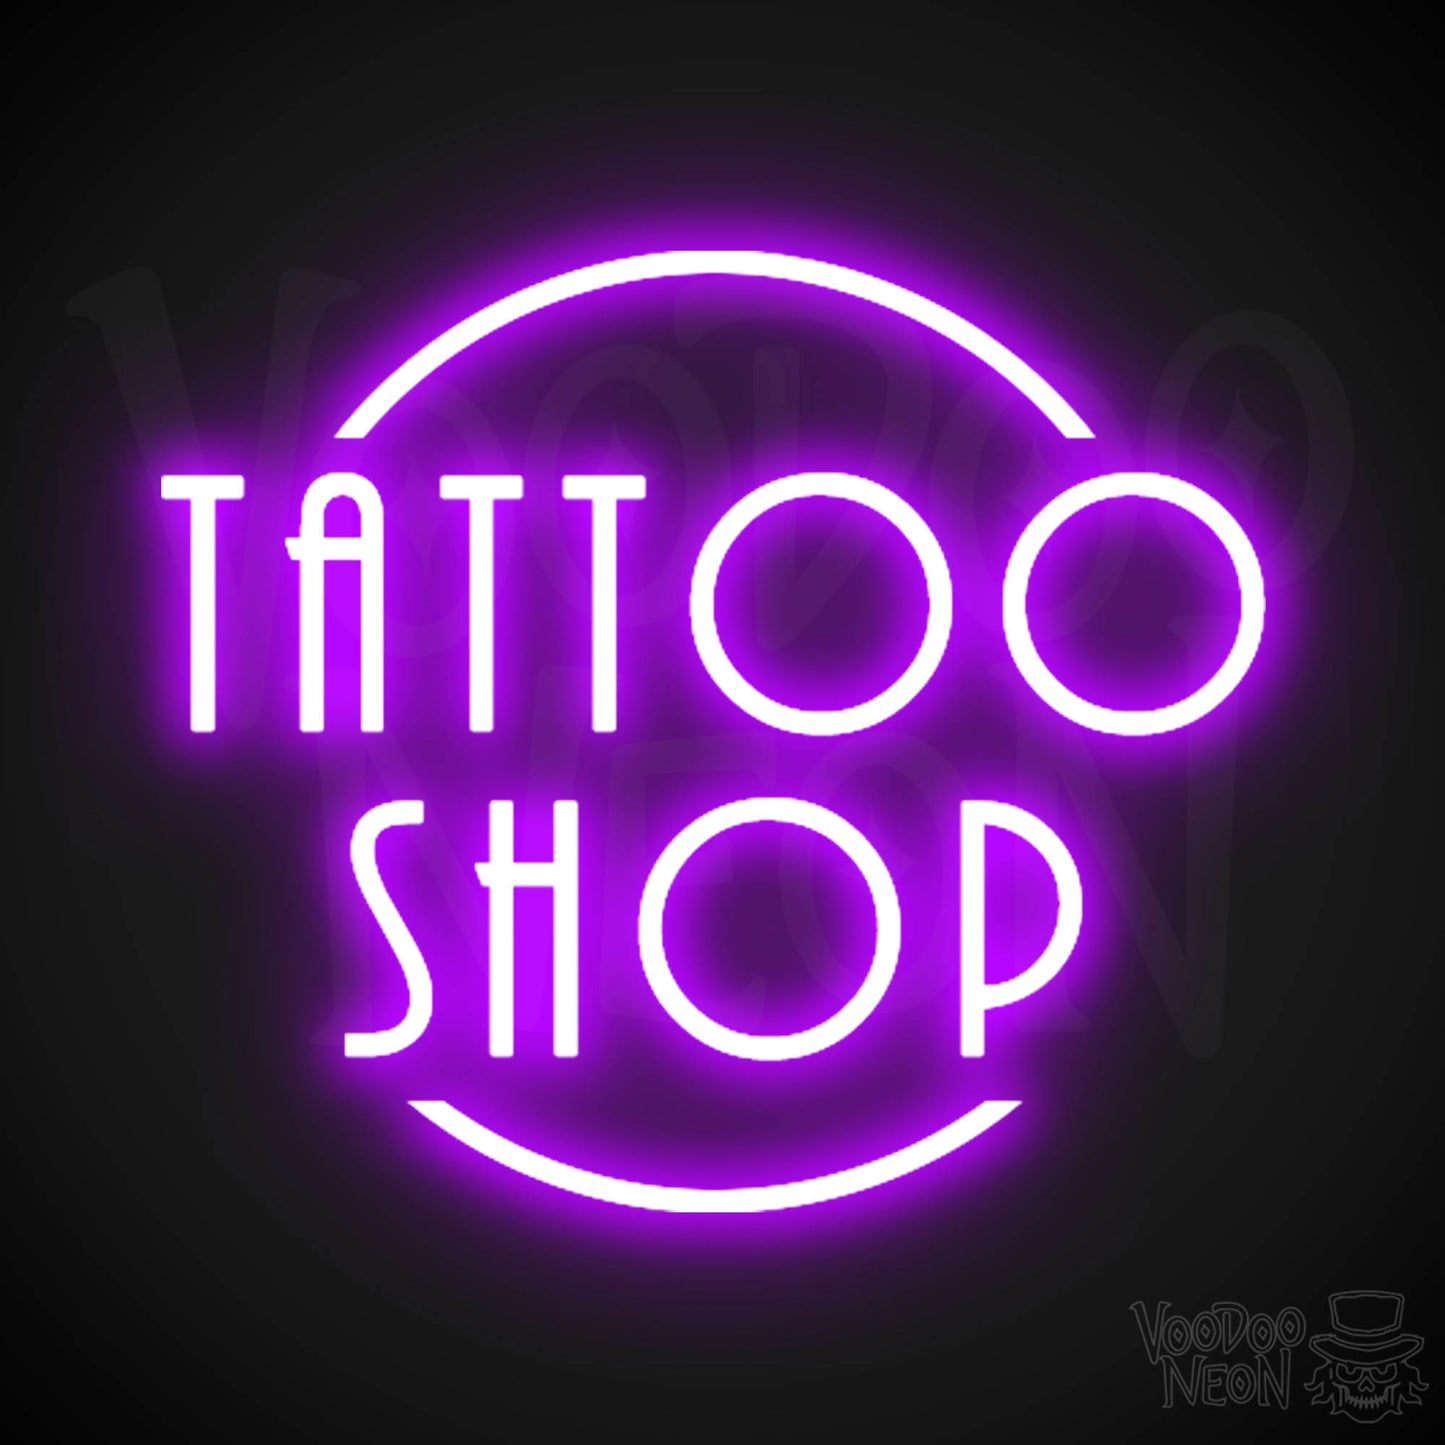 Tattoo Shop Neon Sign - Neon Tattoo Shop Sign - Tattoo Sign - Color Purple